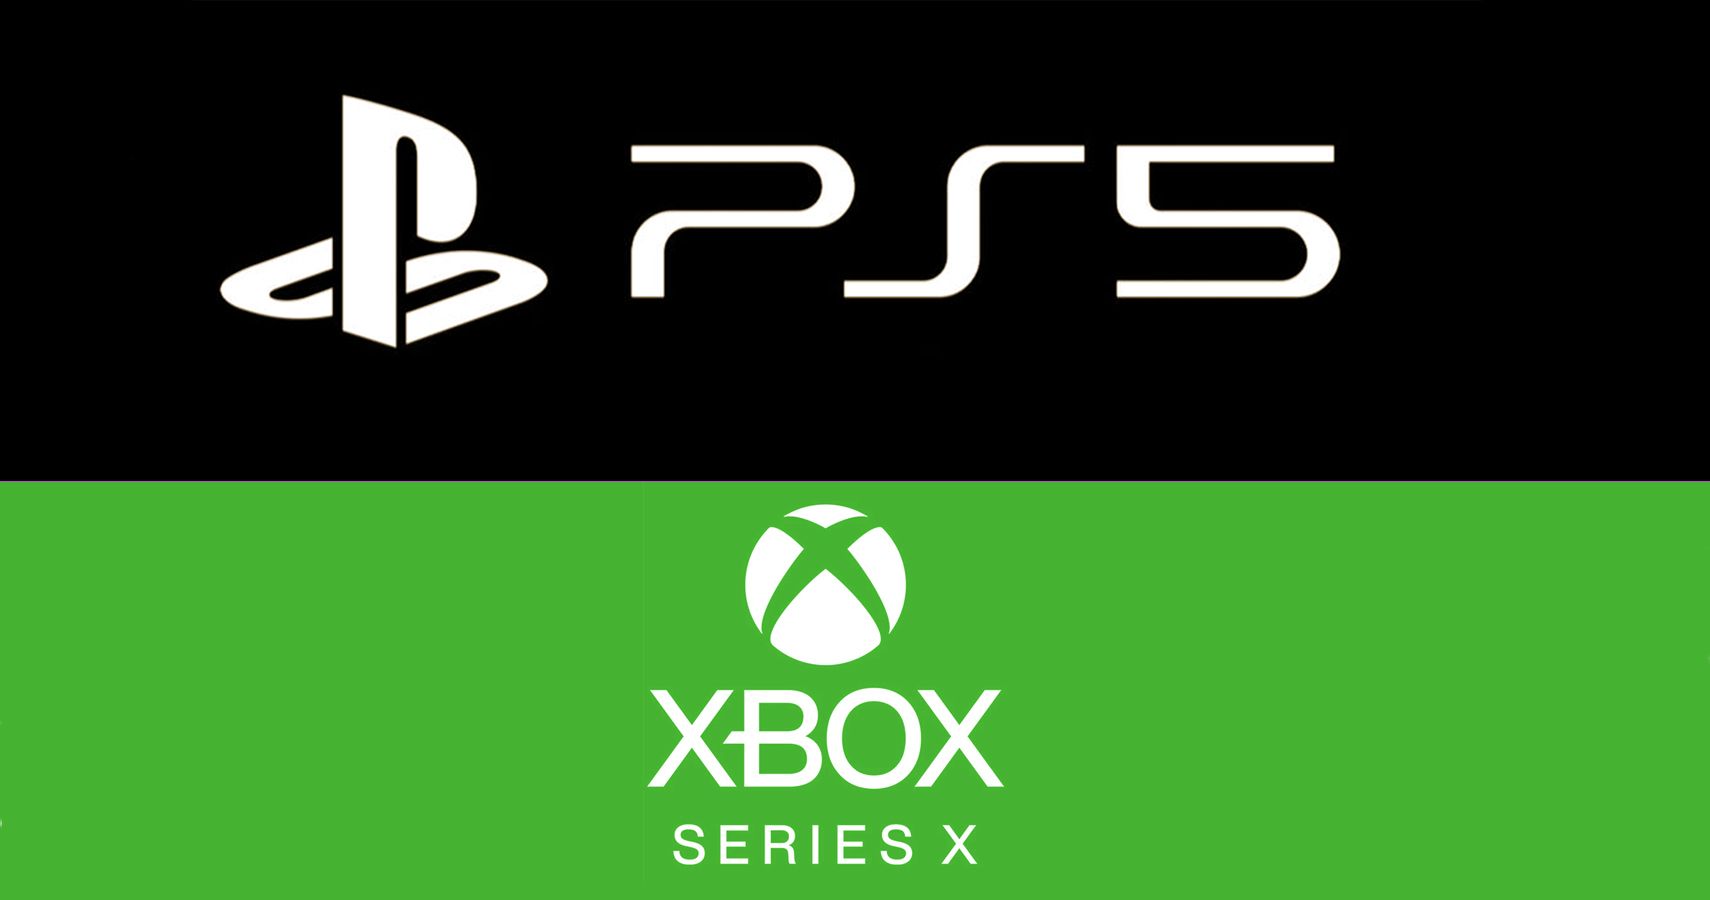 PlayStation 5 and Xbox Series X logos side by side